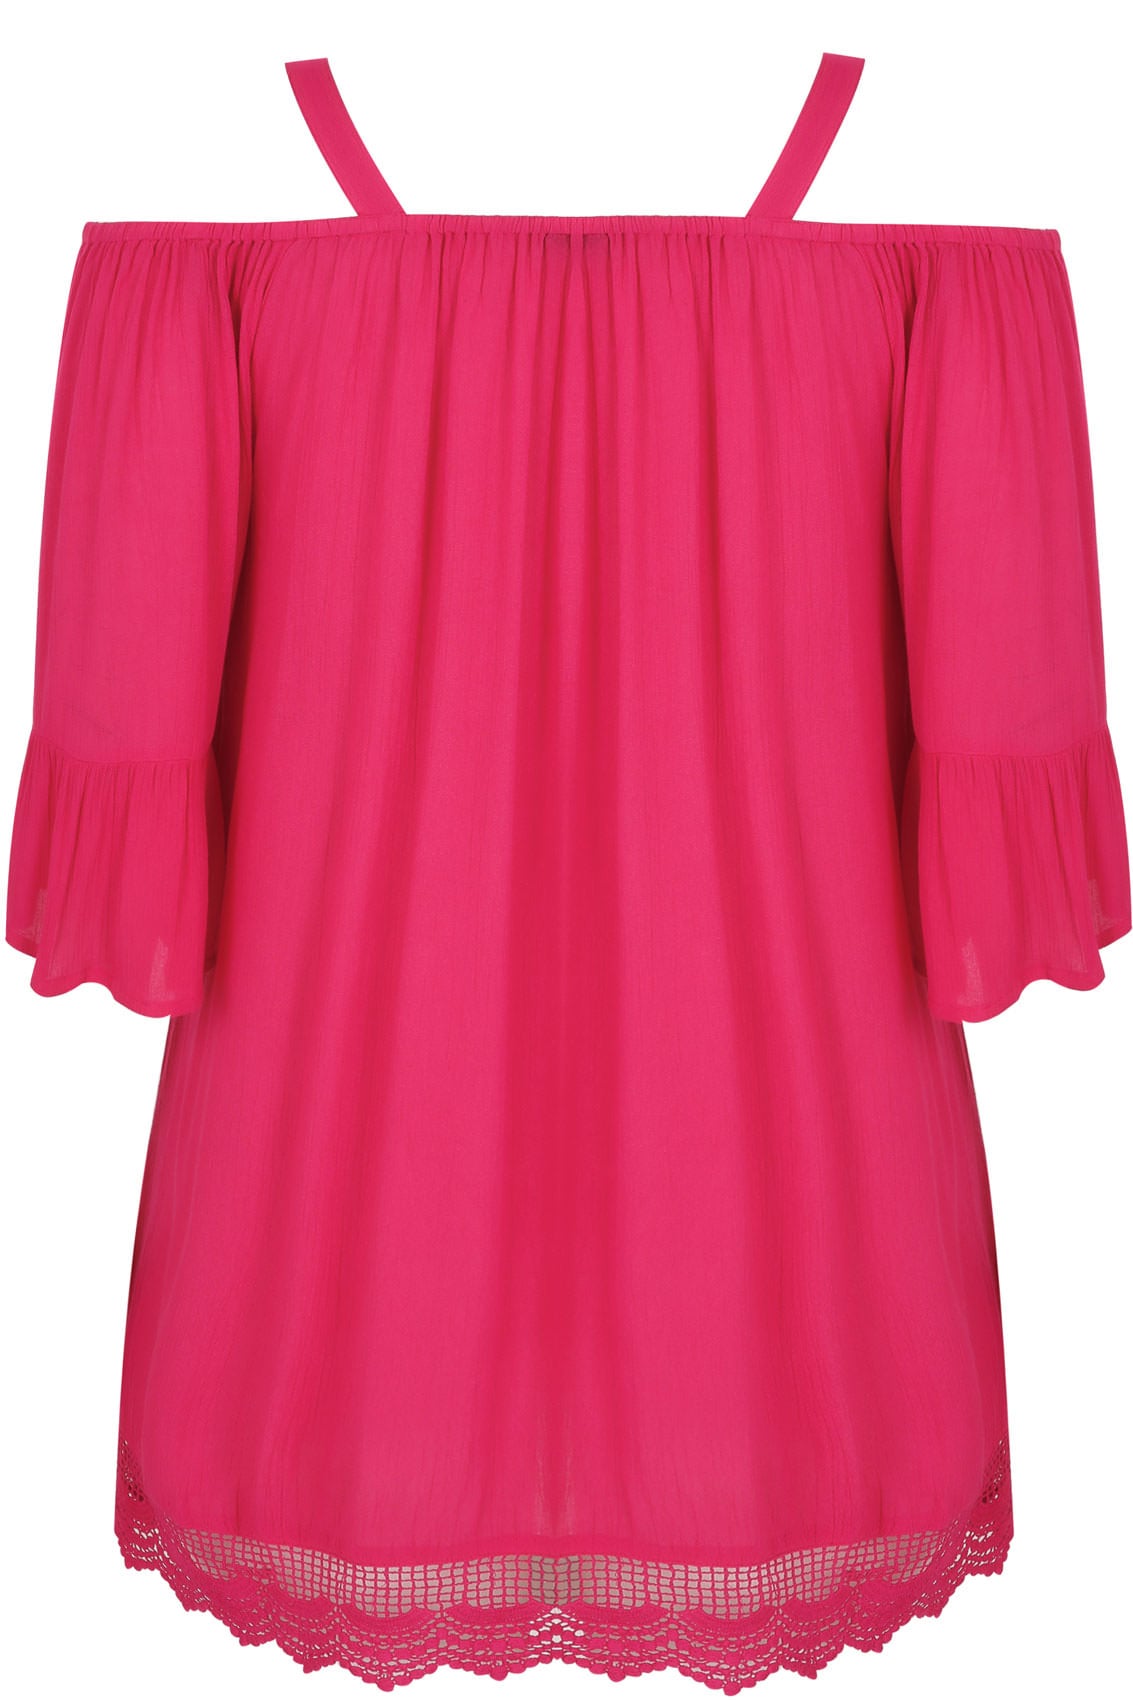 Pink Cold Shoulder Crinkle Top With Frill Sleeves, Plus size 16 to 36